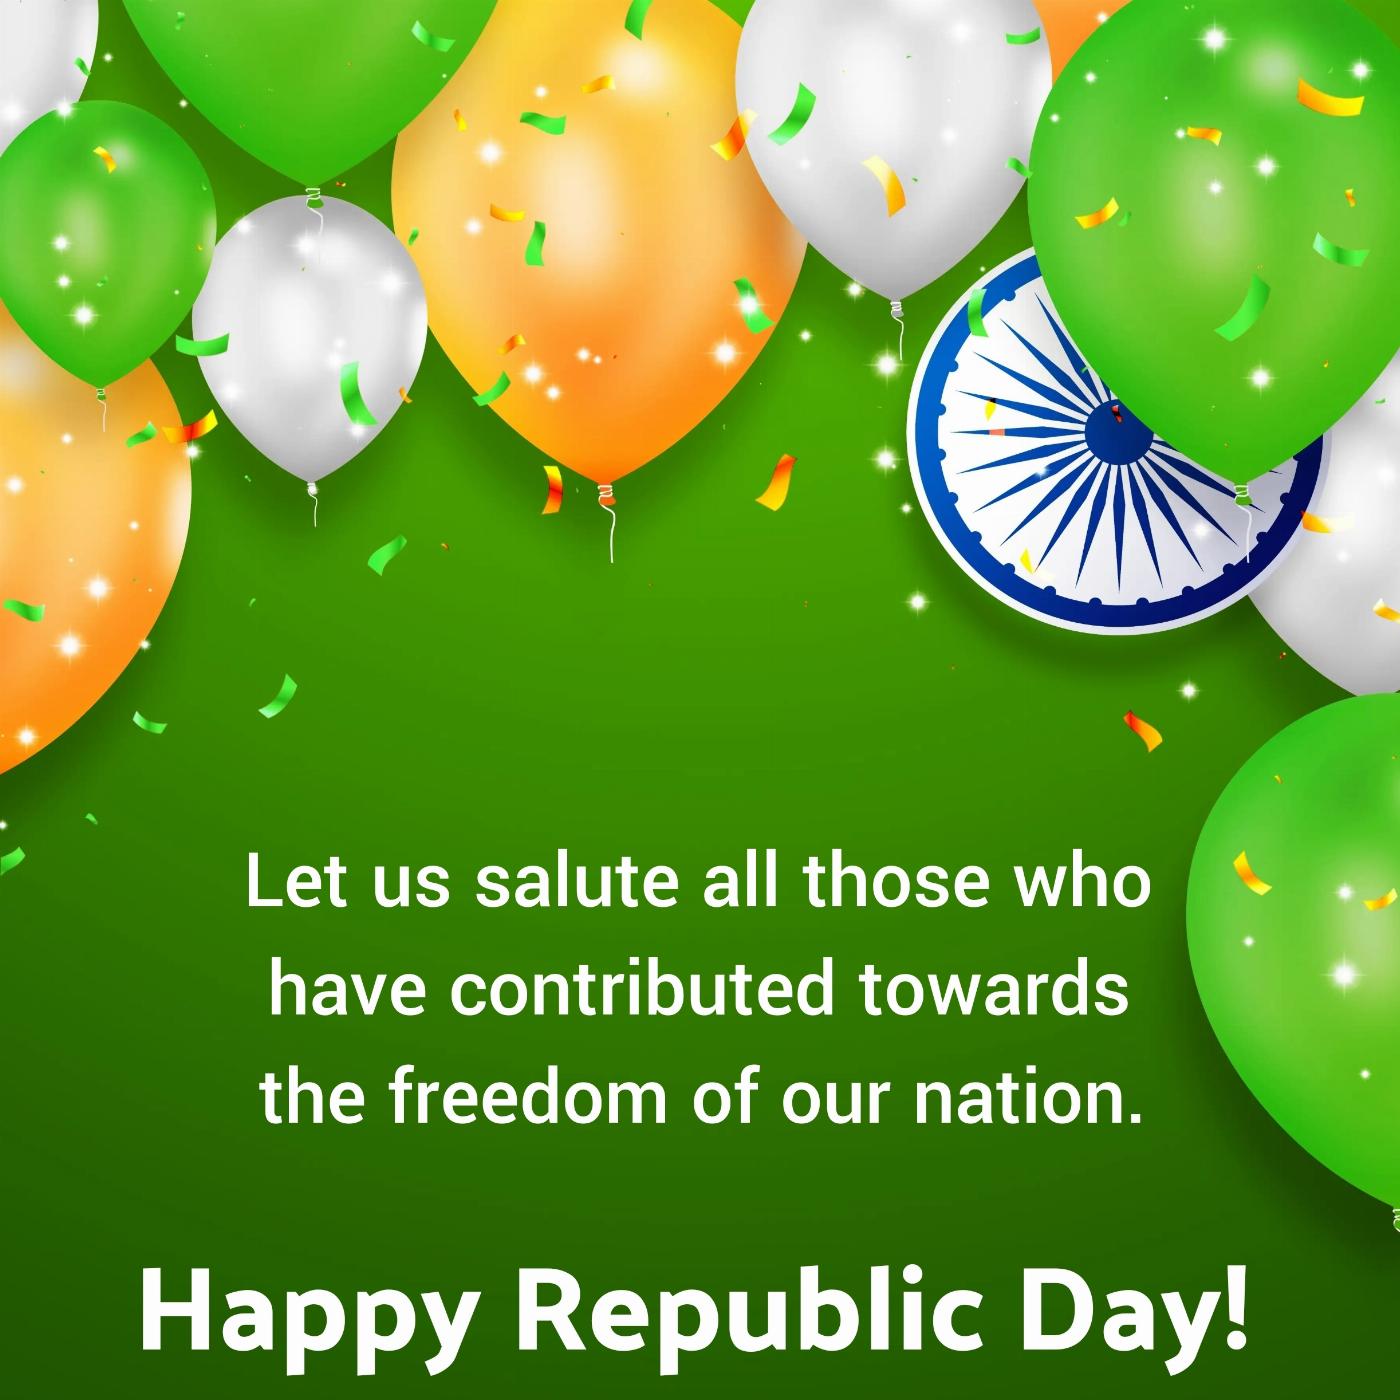 Let us salute all those who have contributed towards